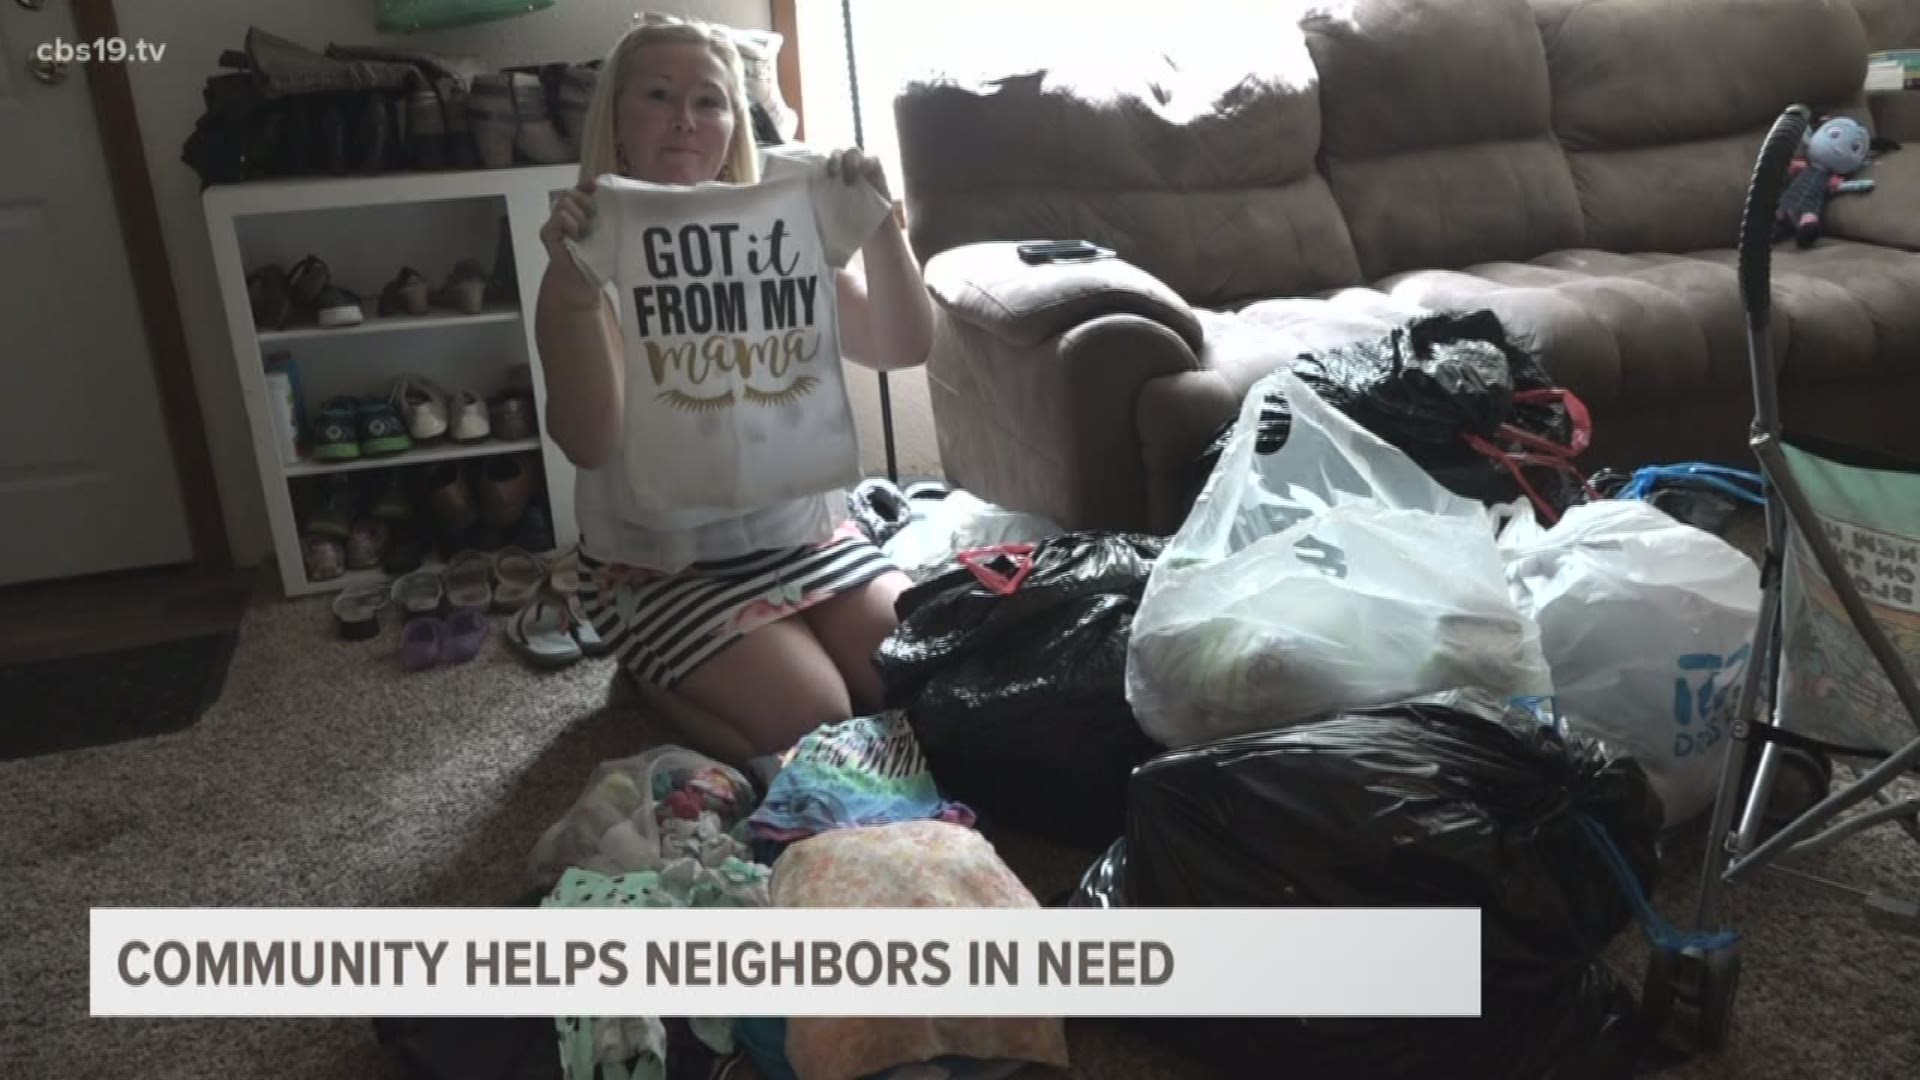 Since the "Who Needs Help in Lindale" page started last week, people have donated everything from clothes to appliances and some people have even offered families financial help.